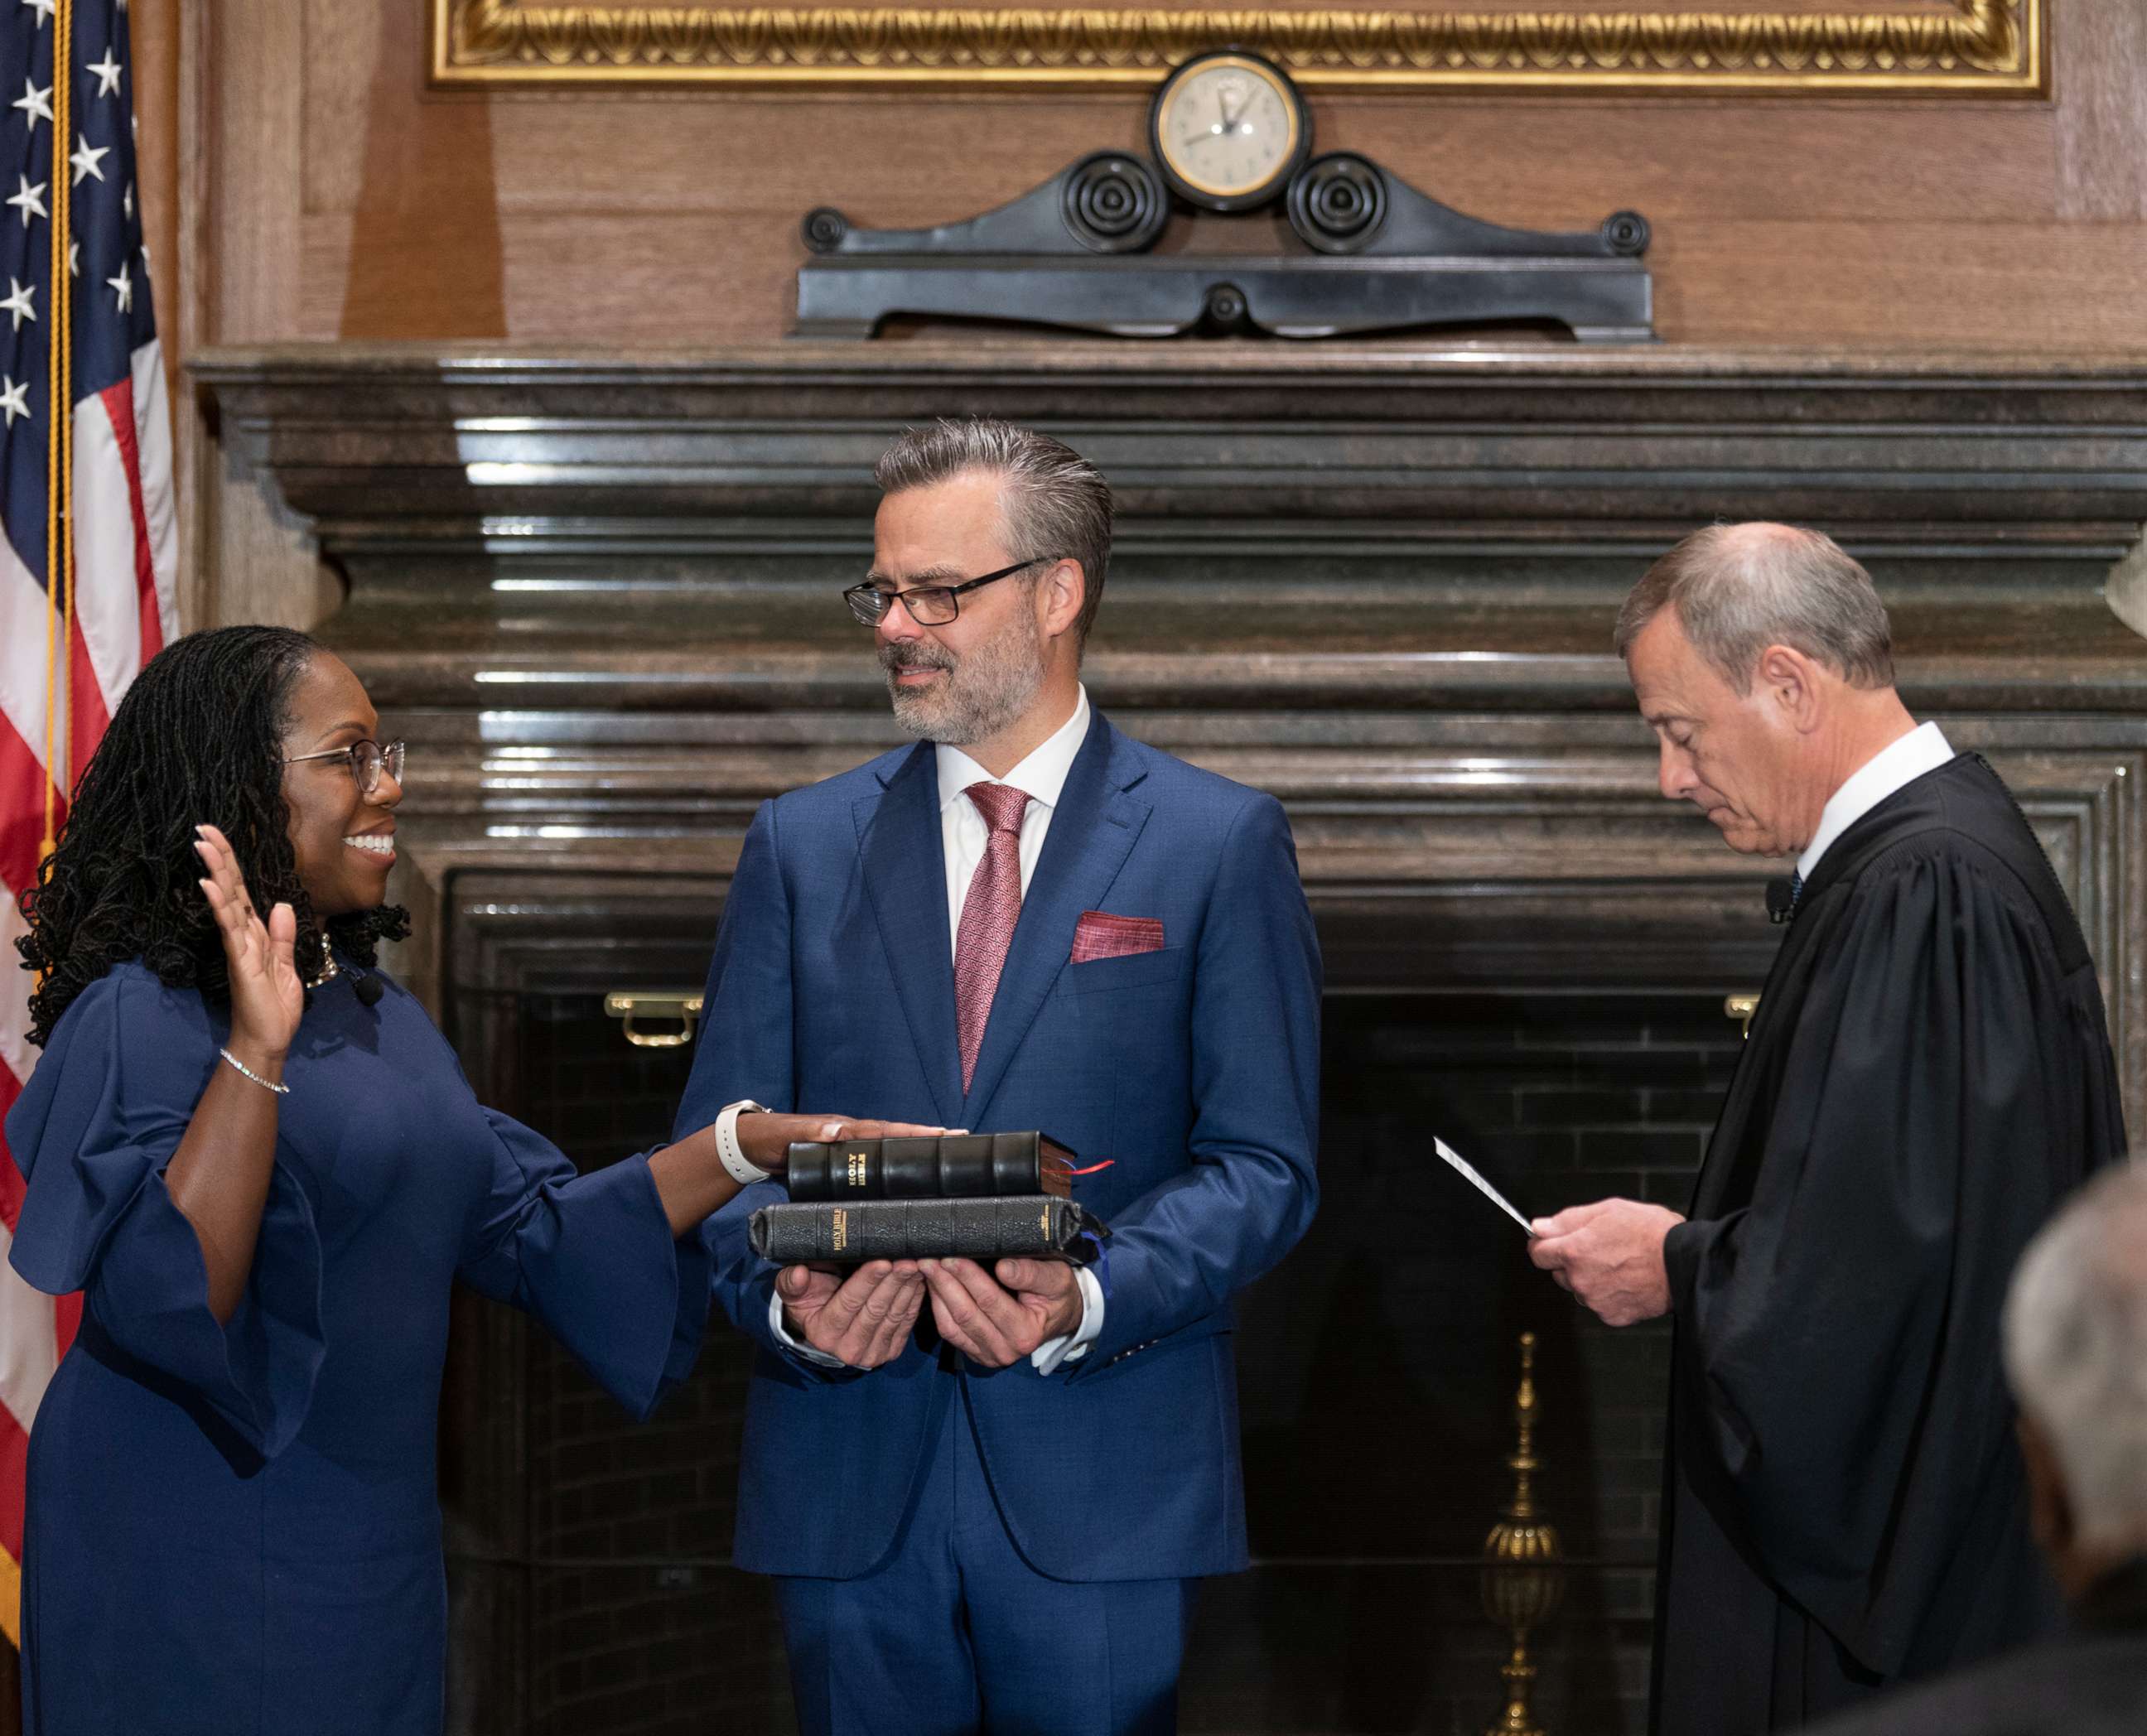 PHOTO: Chief Justice John G. Roberts, Jr., administers the Constitutional Oath to Judge Ketanji Brown Jackson in the West Conference Room, Supreme Court Building in Washington, D.C., on June 30, 2022. Dr. Patrick Jackson holds the Bible.
